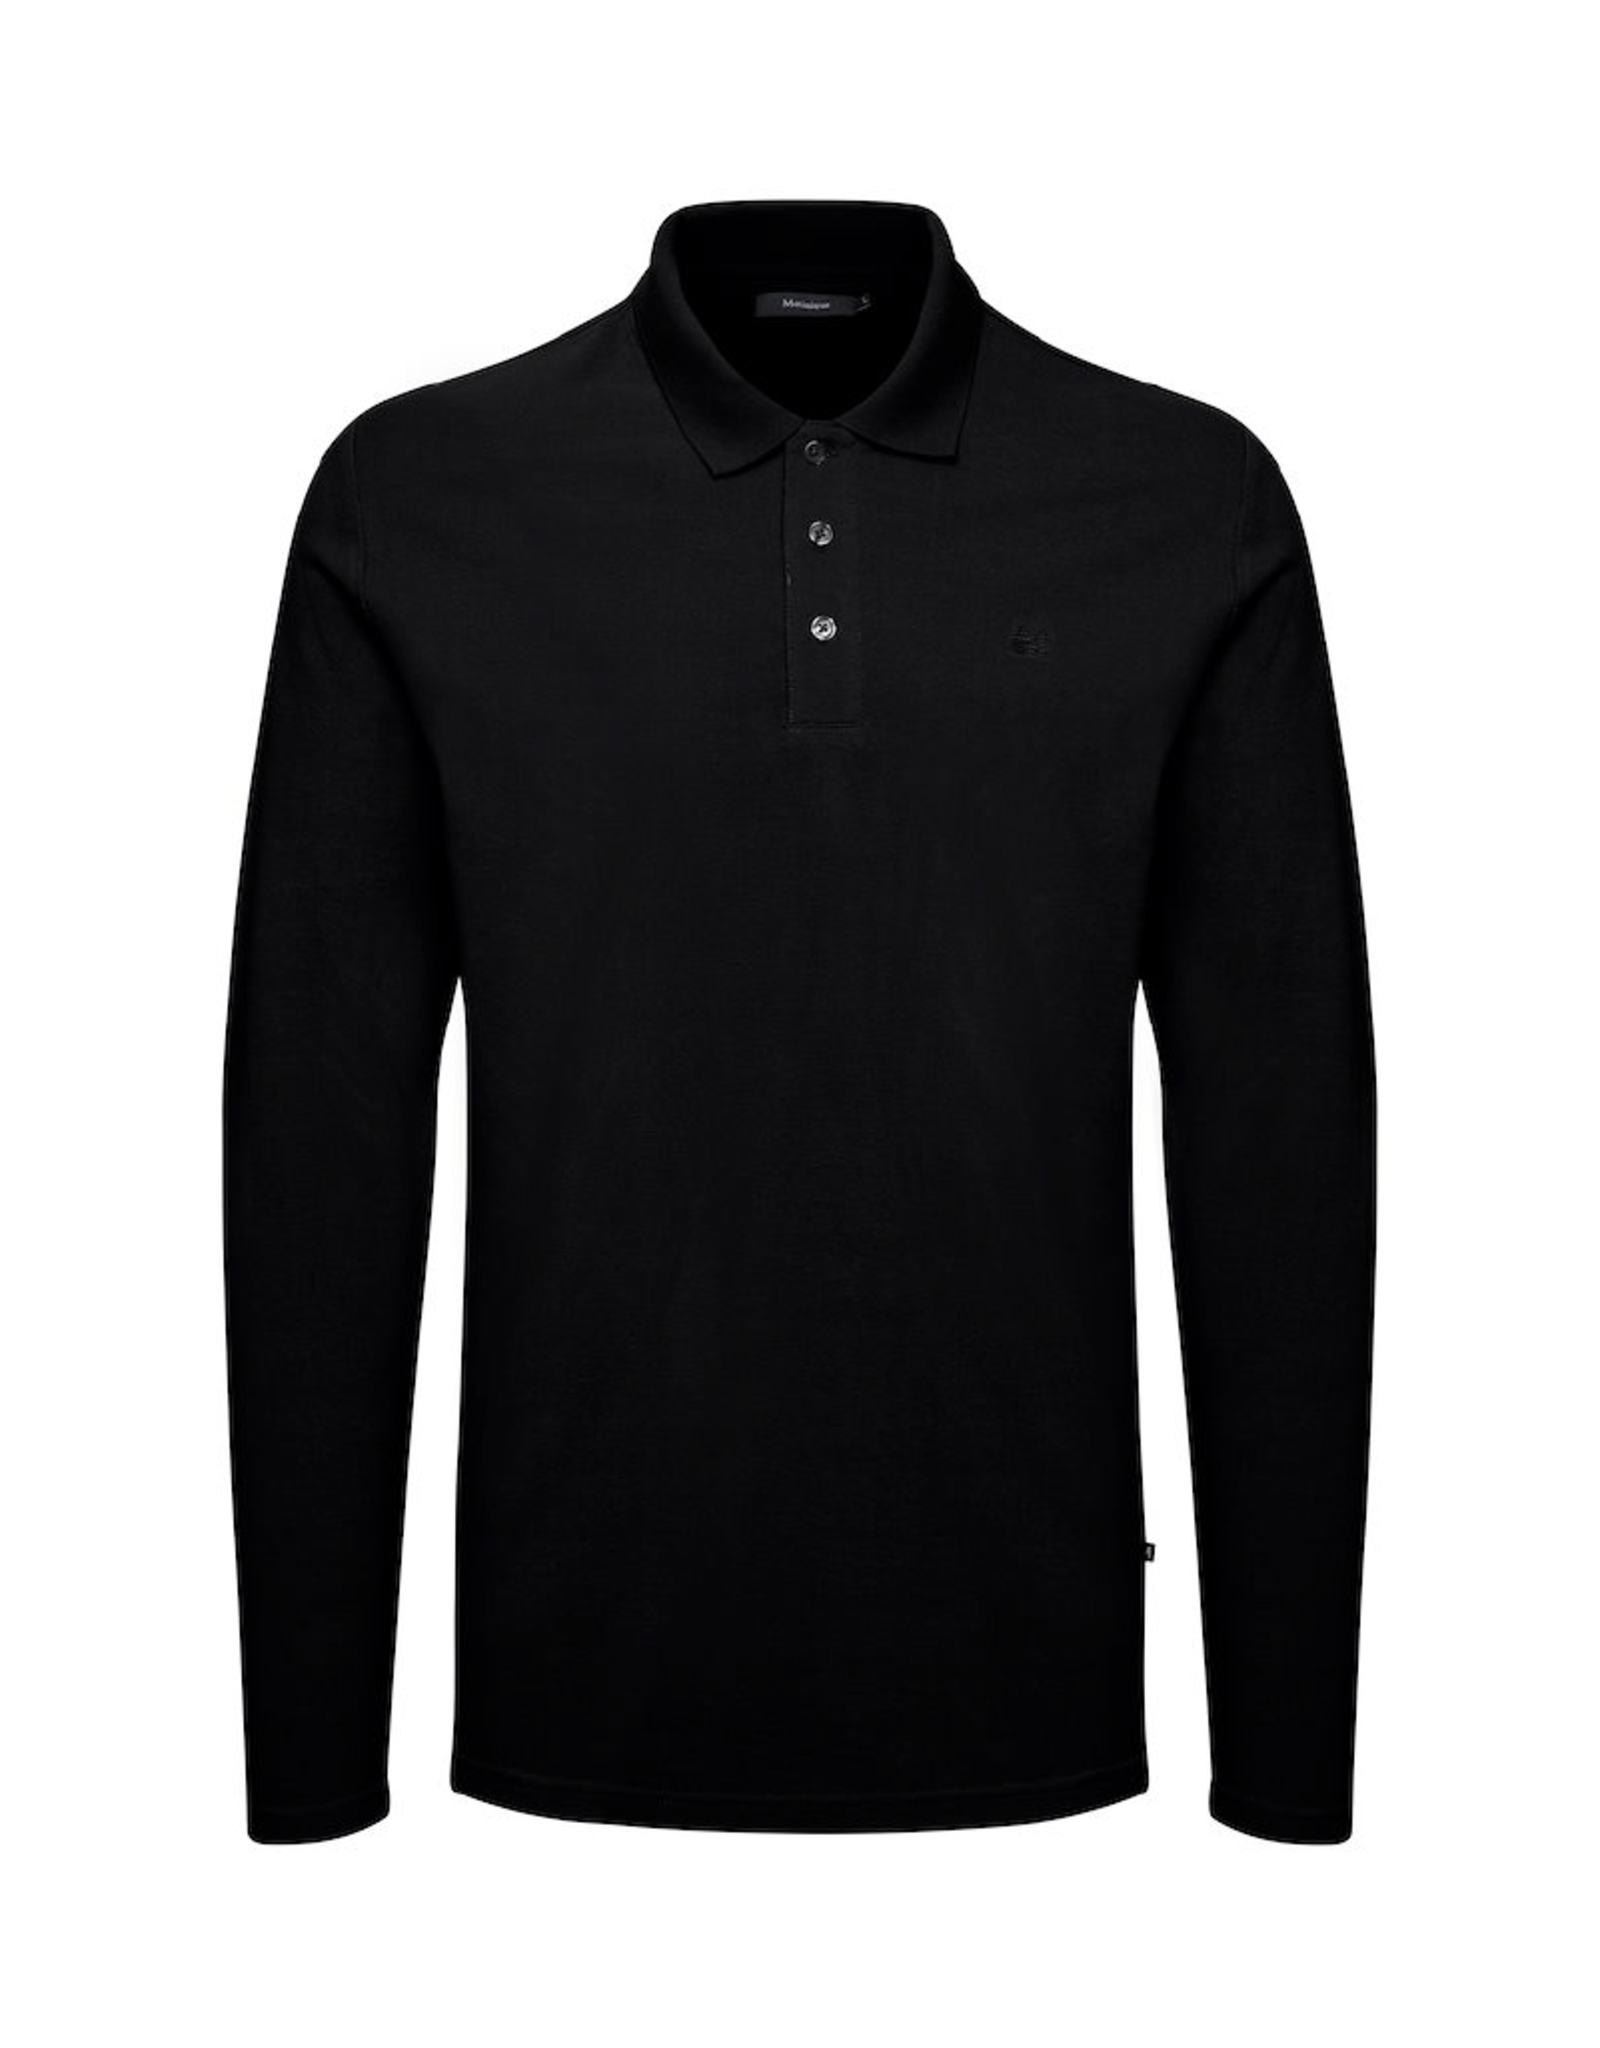 Matinique Poleo Long-Sleeve Rugby Collar Knit Shirt